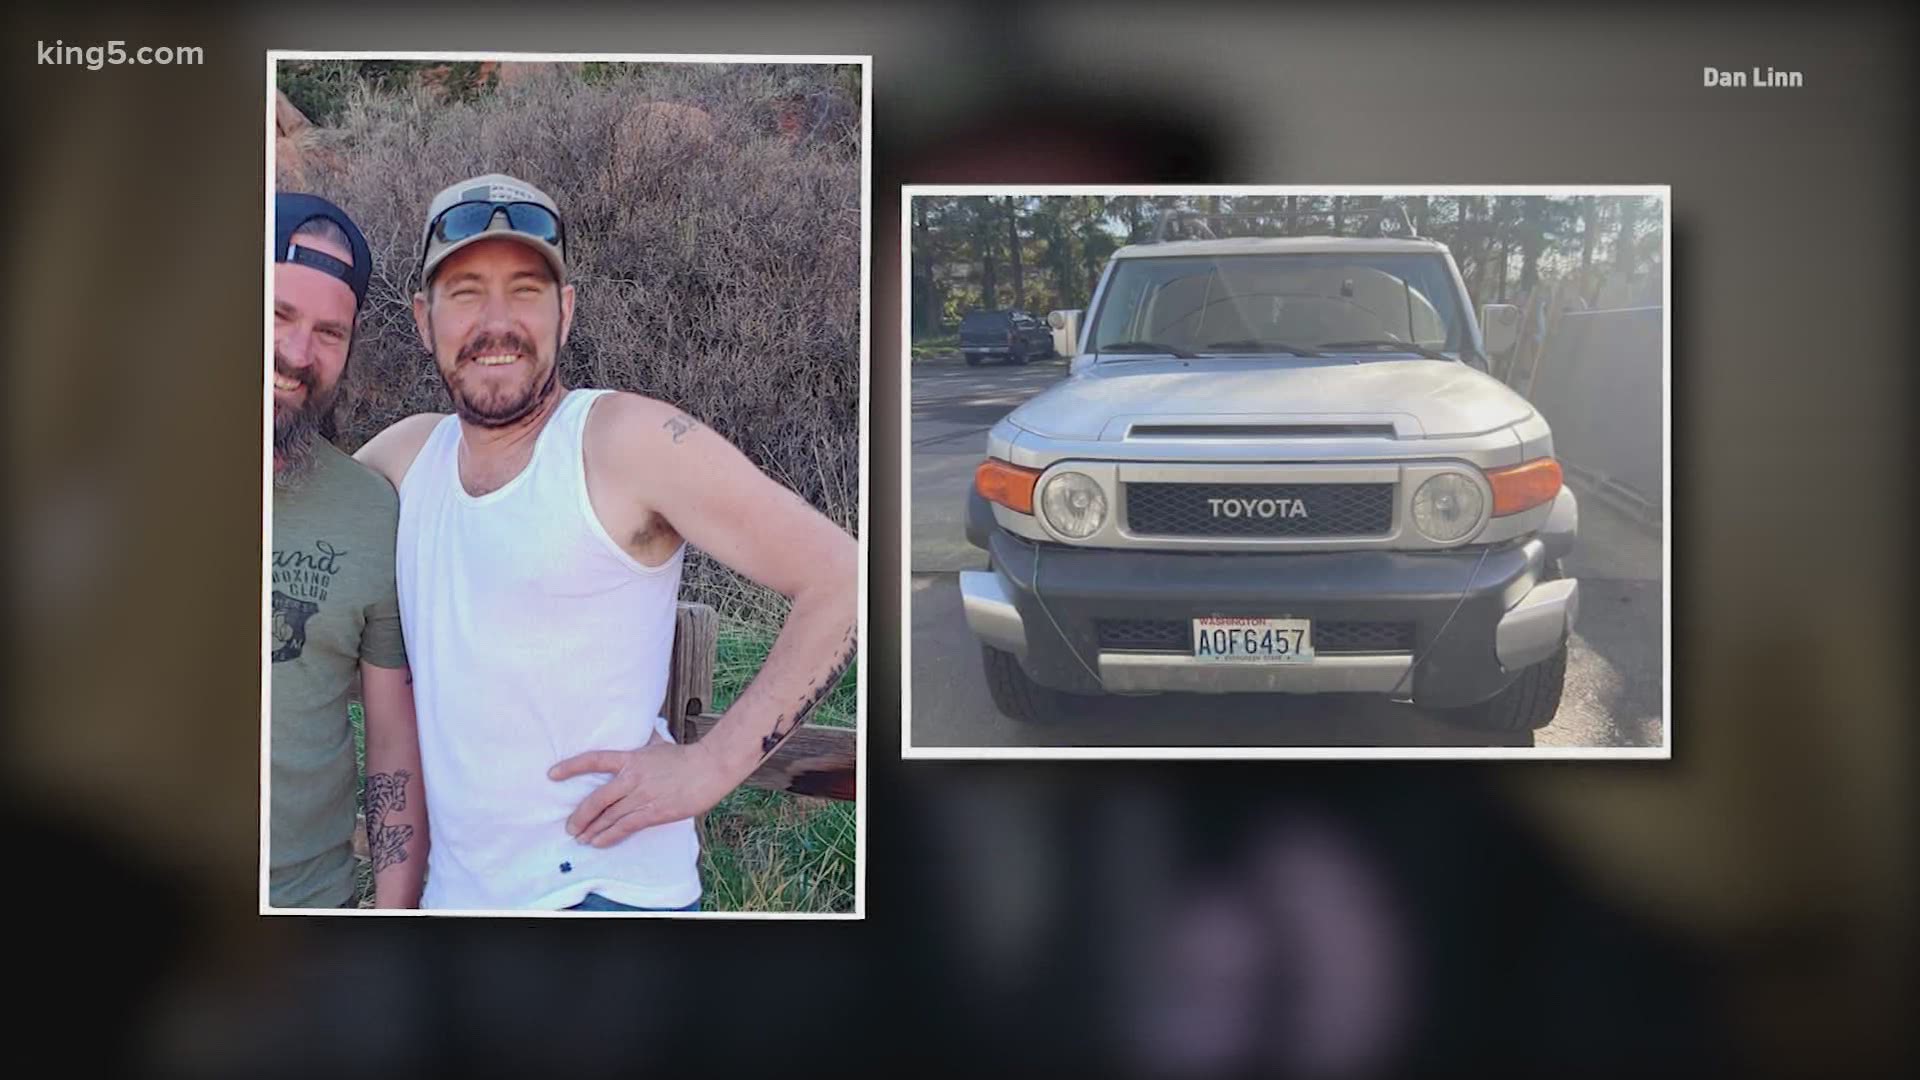 Friends say searchers spotted an unknown man driving an SUV belonging to Ian Eckles of Kent, who was last seen more than a week ago near Cle Elum.